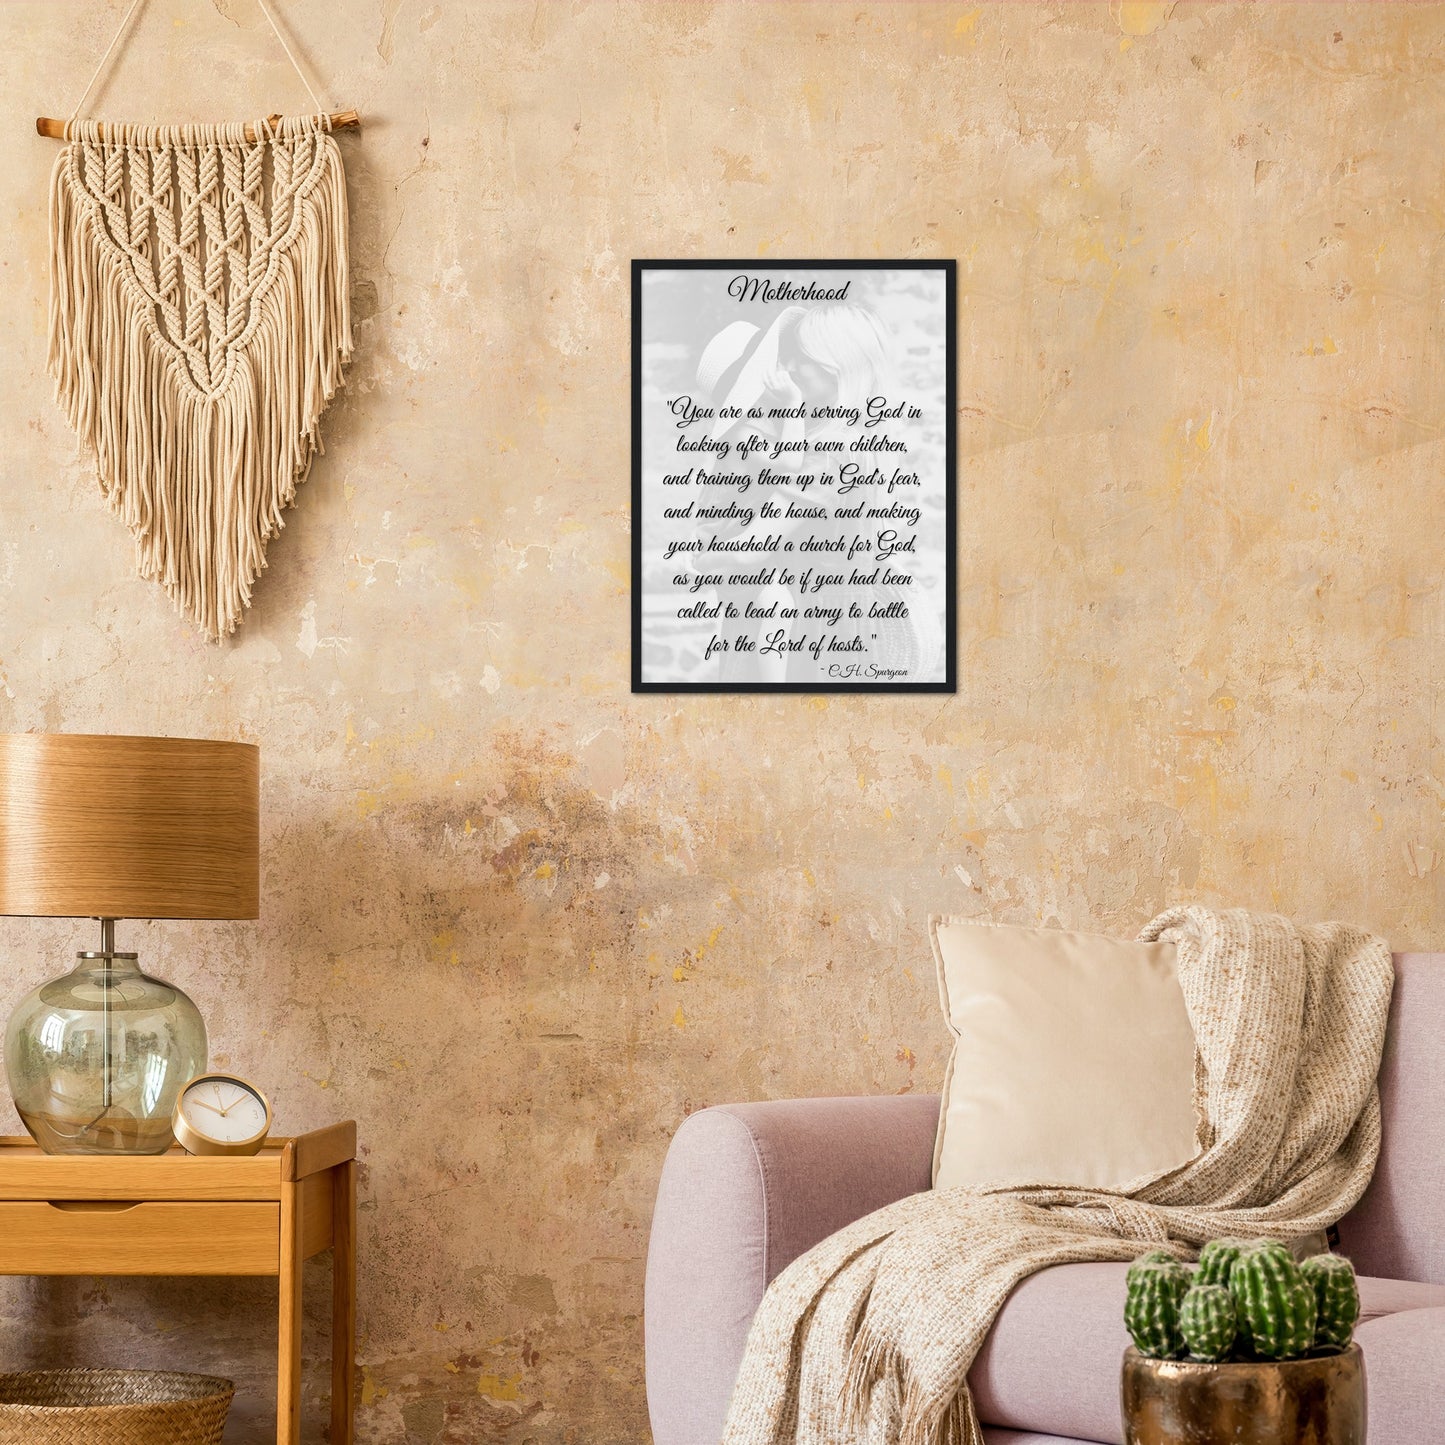 Framed Motherhood Quote Slightly Transparent | Quote by C.H. Spurgeon Poster | Christian Wall Art for Mom